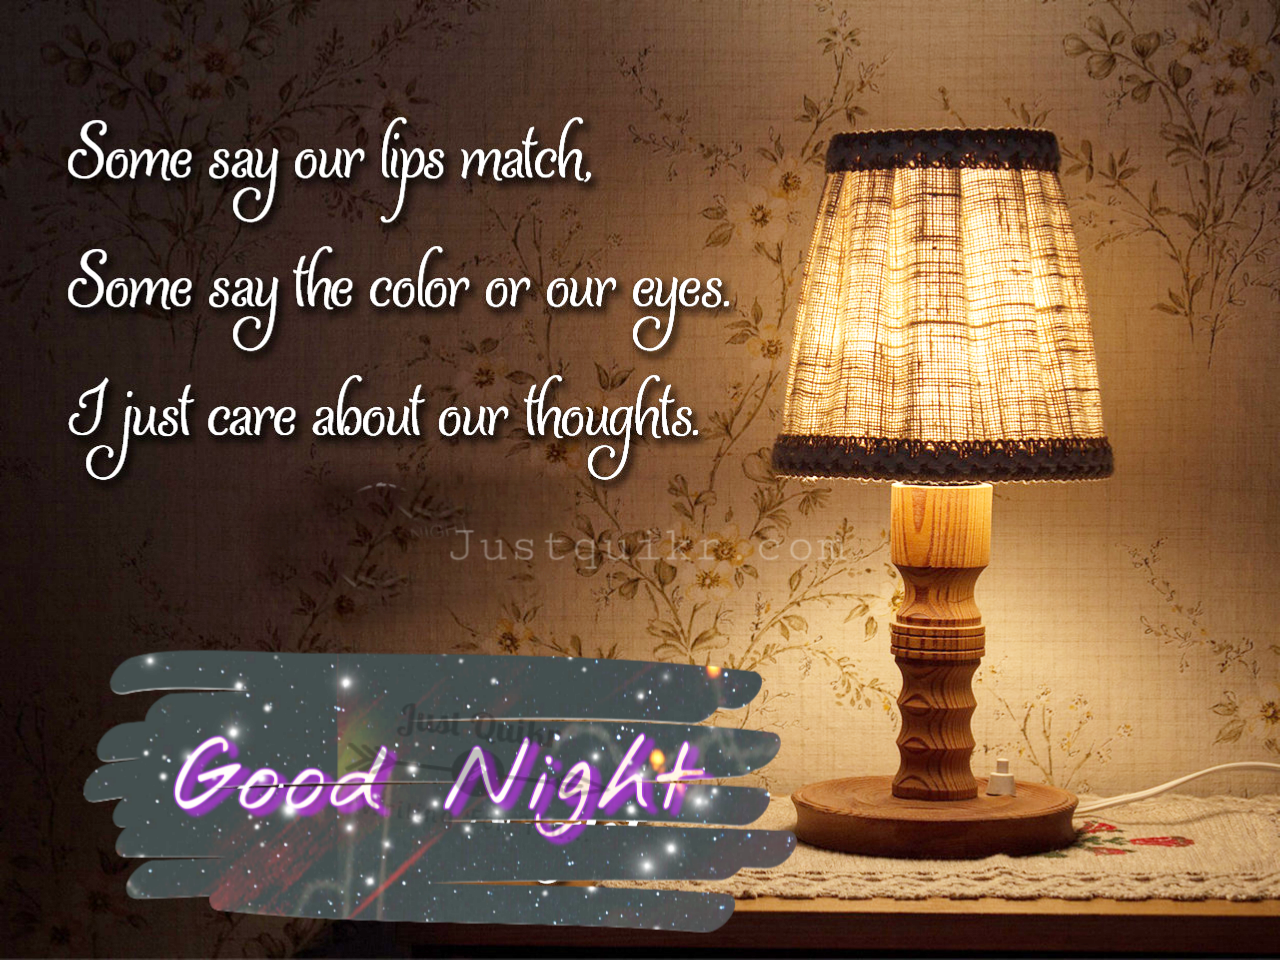 Good Night HD Pics Images For Cousins